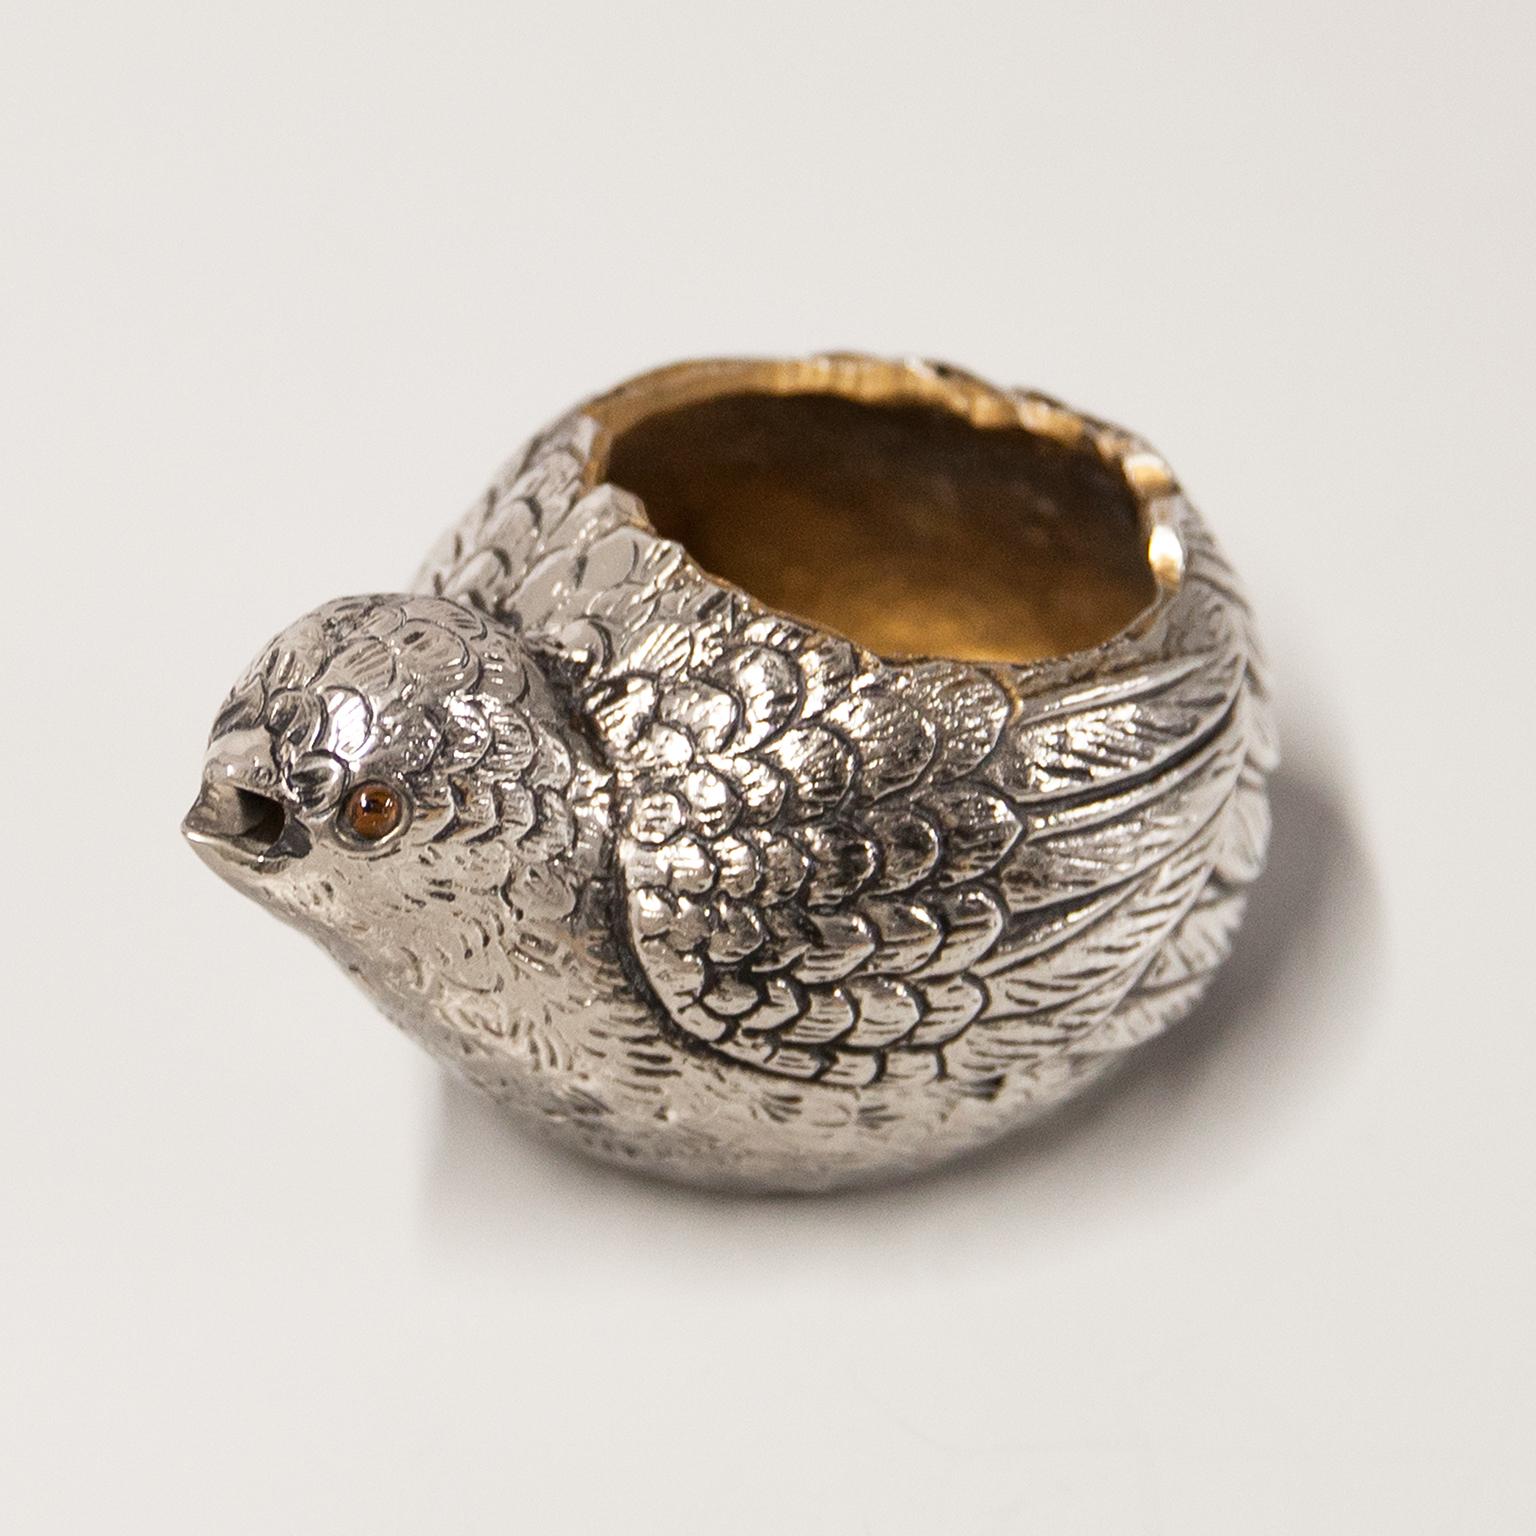 Gucci Vintage quail tea light candle holders in silver plated metal and little glass rubin eyes and signed with Gucci. Very good vintage condition.